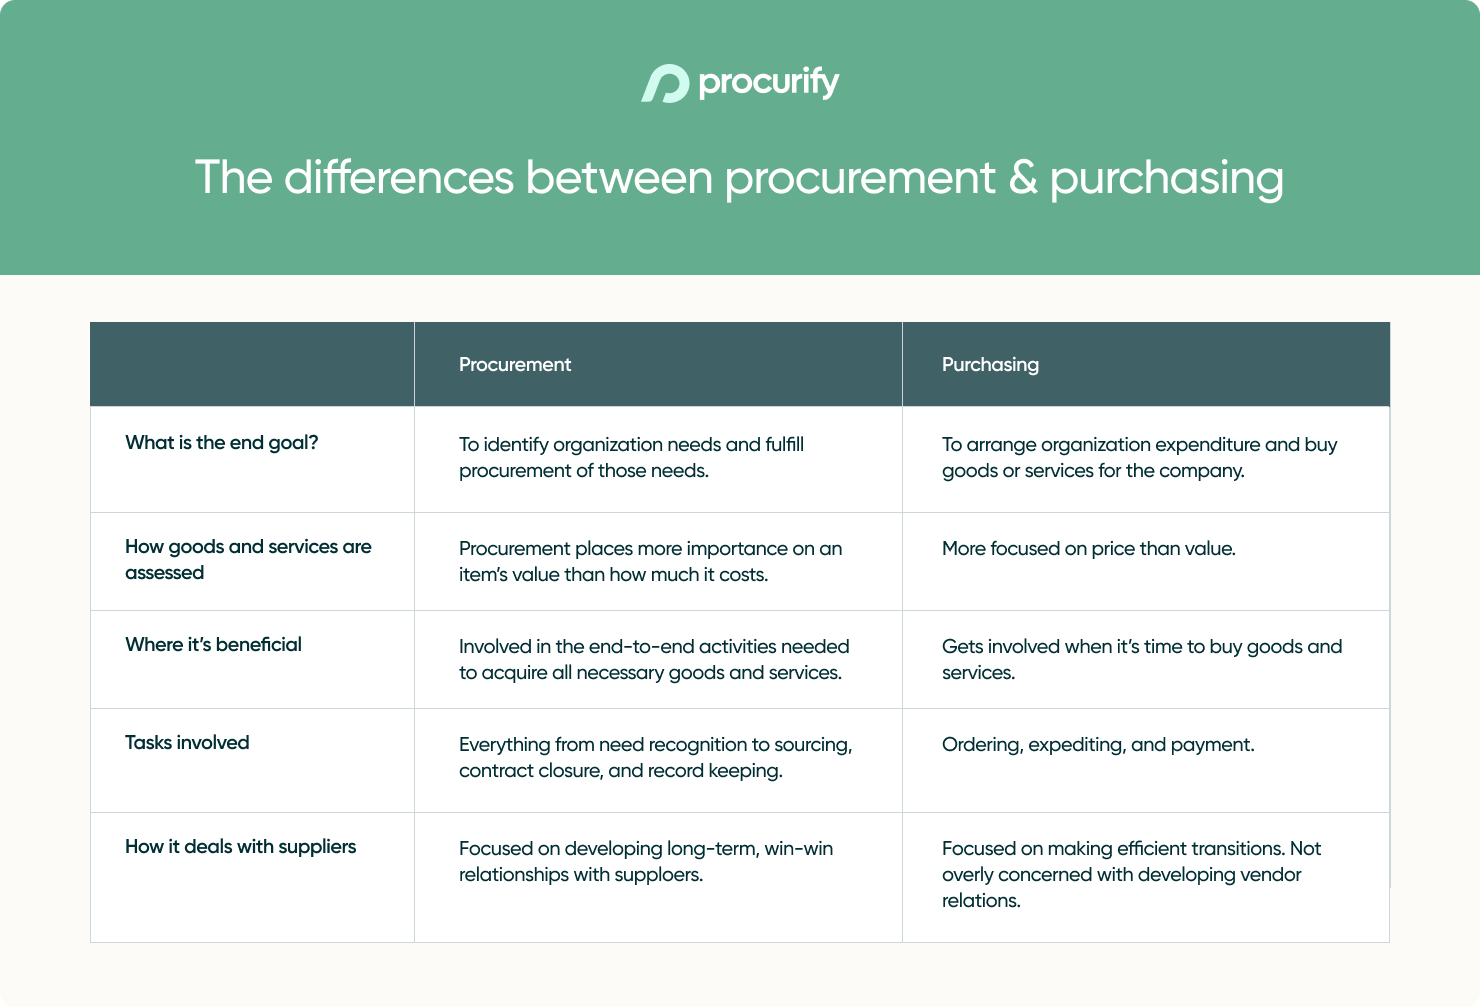 Procurement vs Purchasing: What's the Difference?